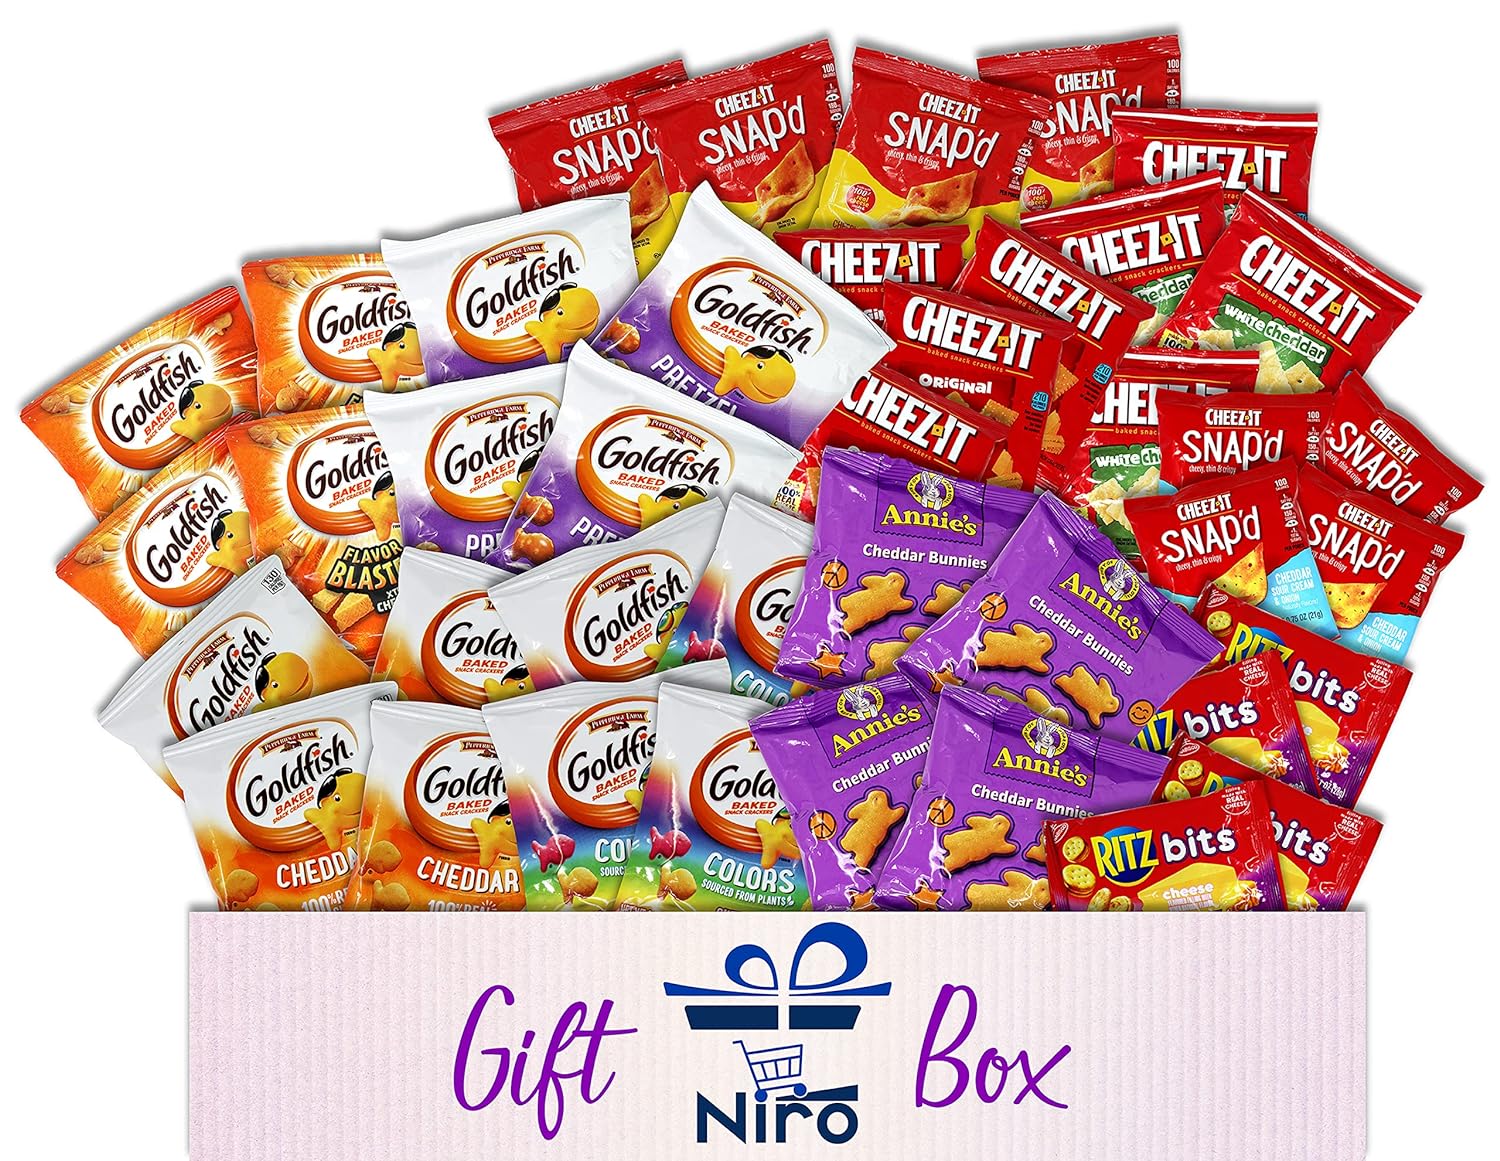 Niro Assortment | 40 Packs Individual Bags Cheese Crackers Variety Pack, Cheez-It, Gold fish, Annie's, and Ritz Bits Snack Packs | Snacks for Adults and Children